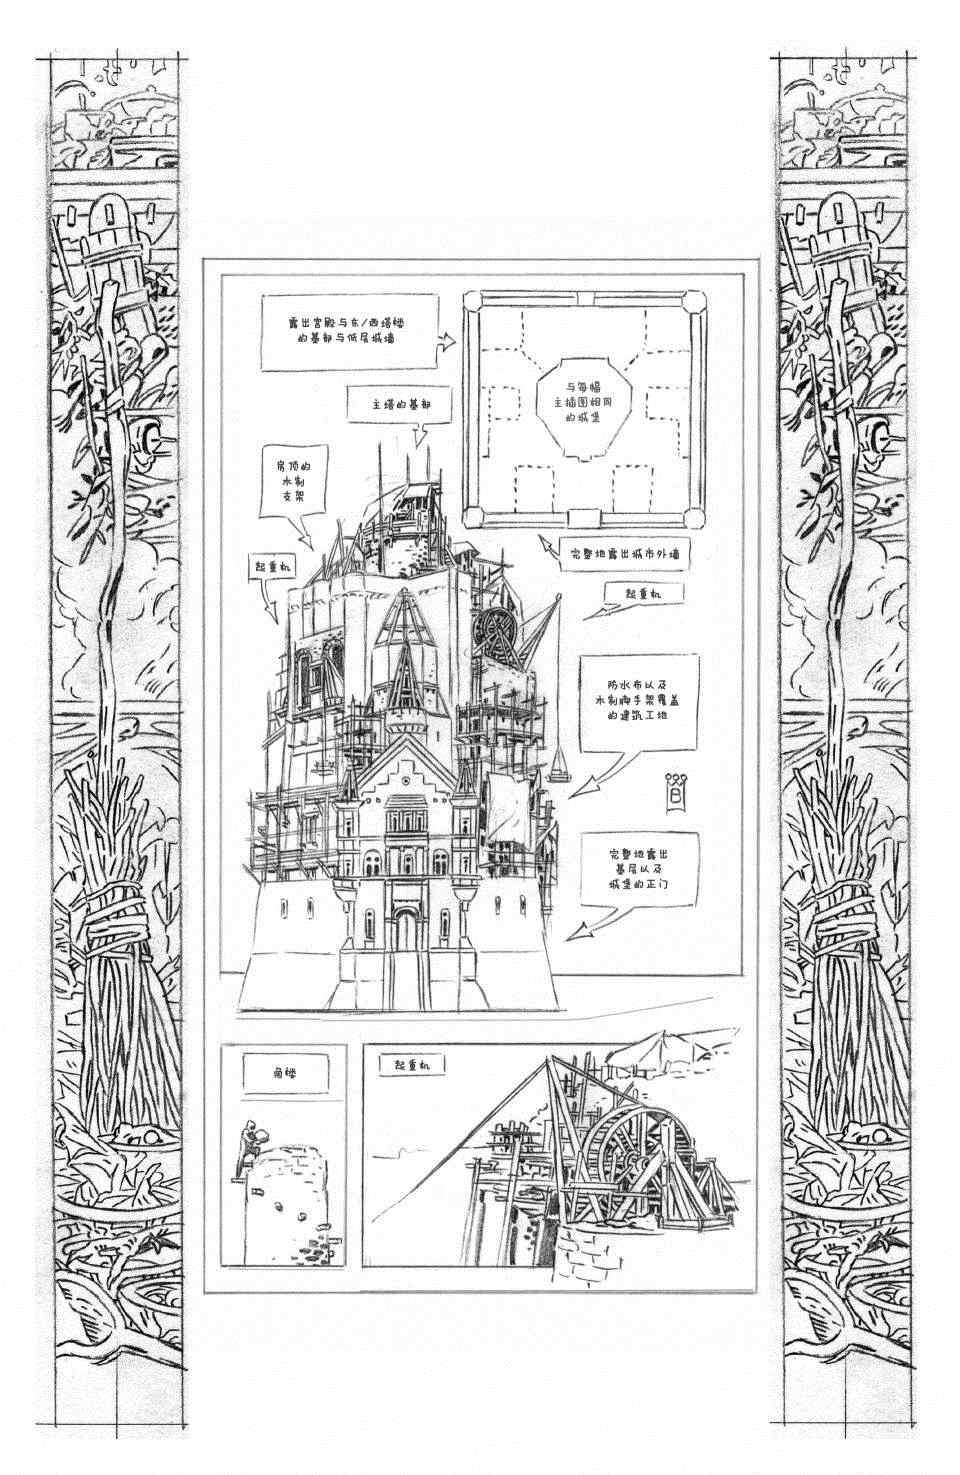 《Fables》漫画 100卷